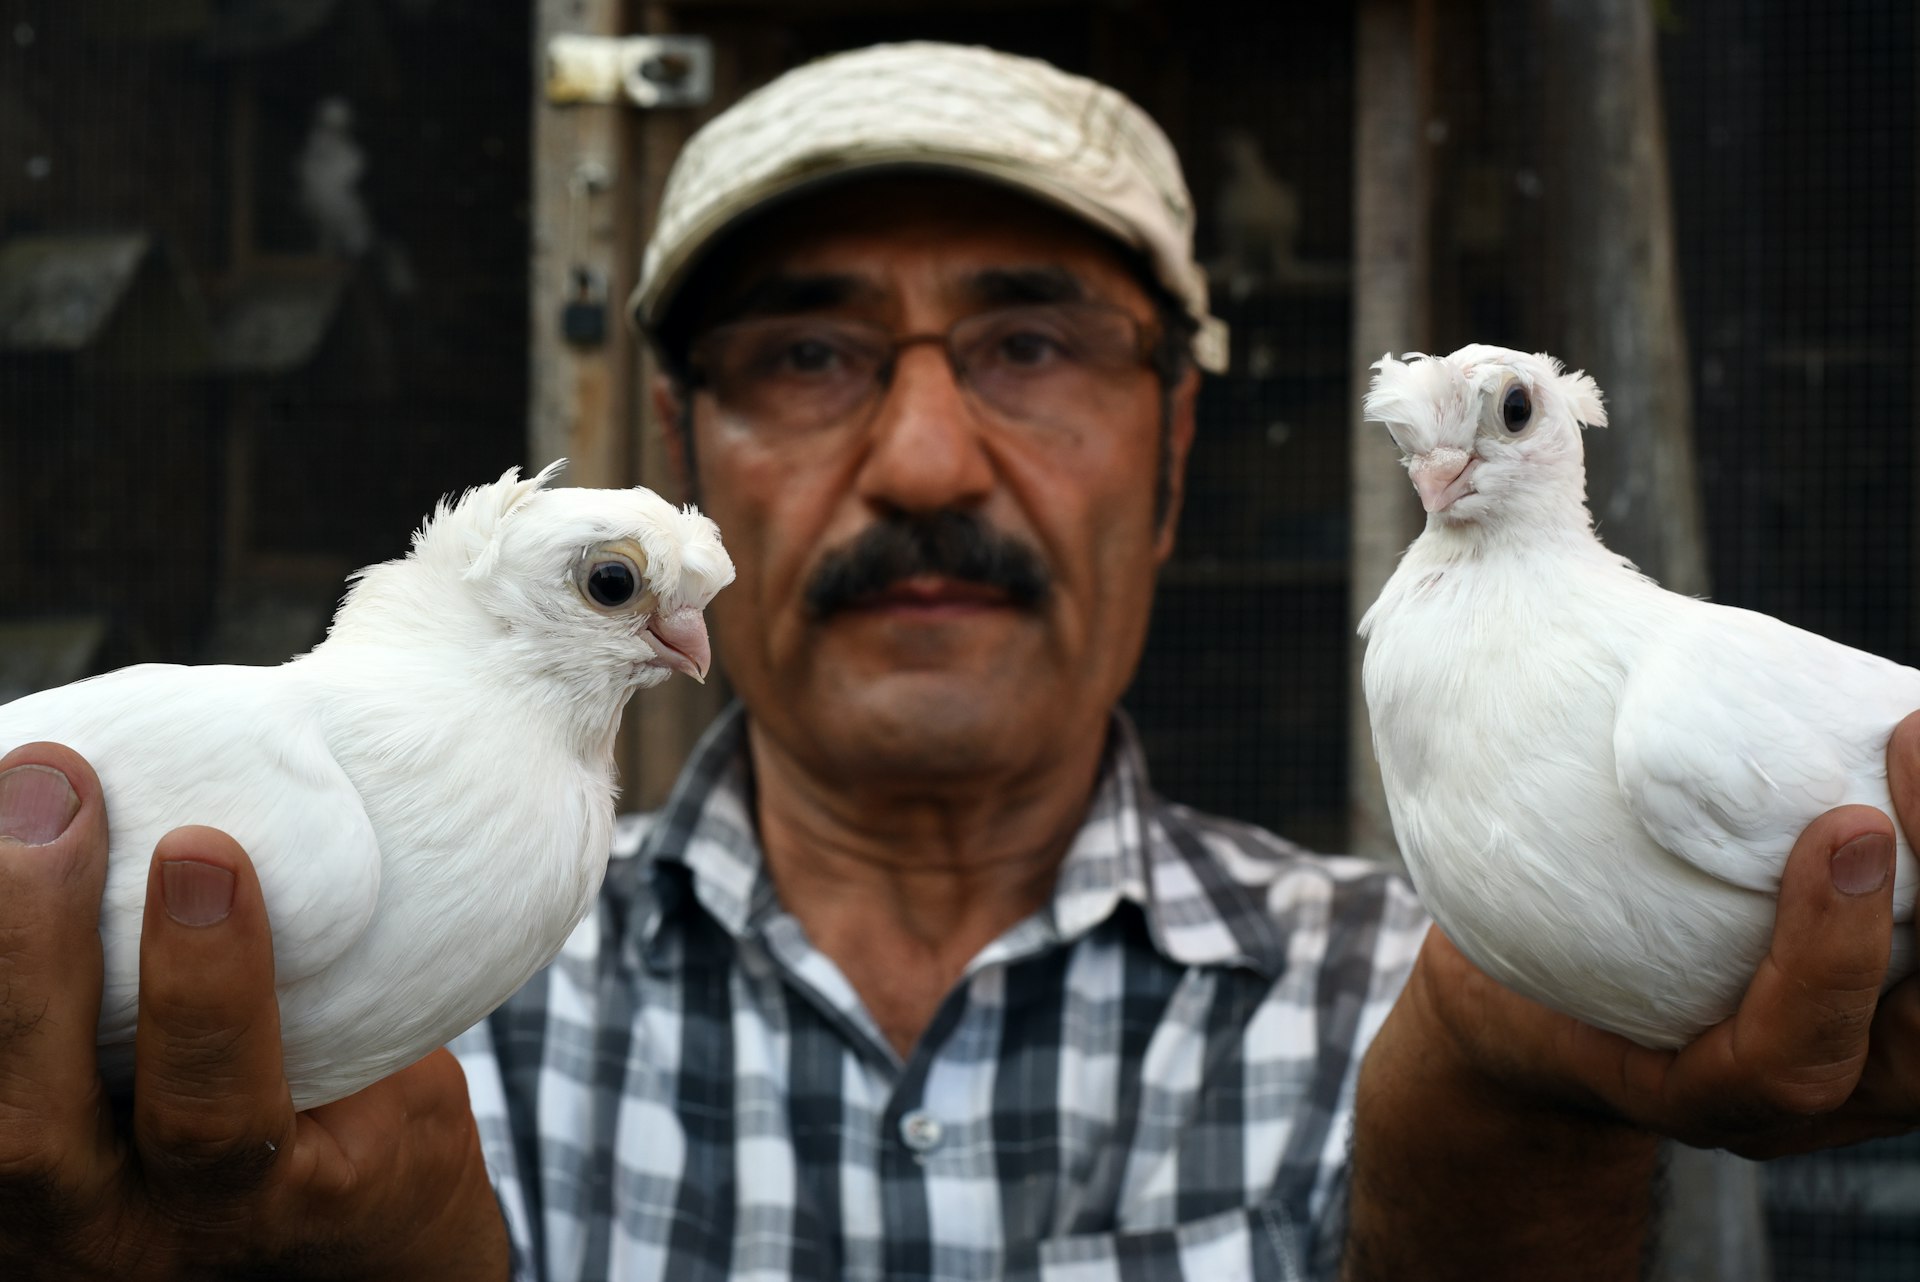 In photos: the last of New York’s pigeon racers